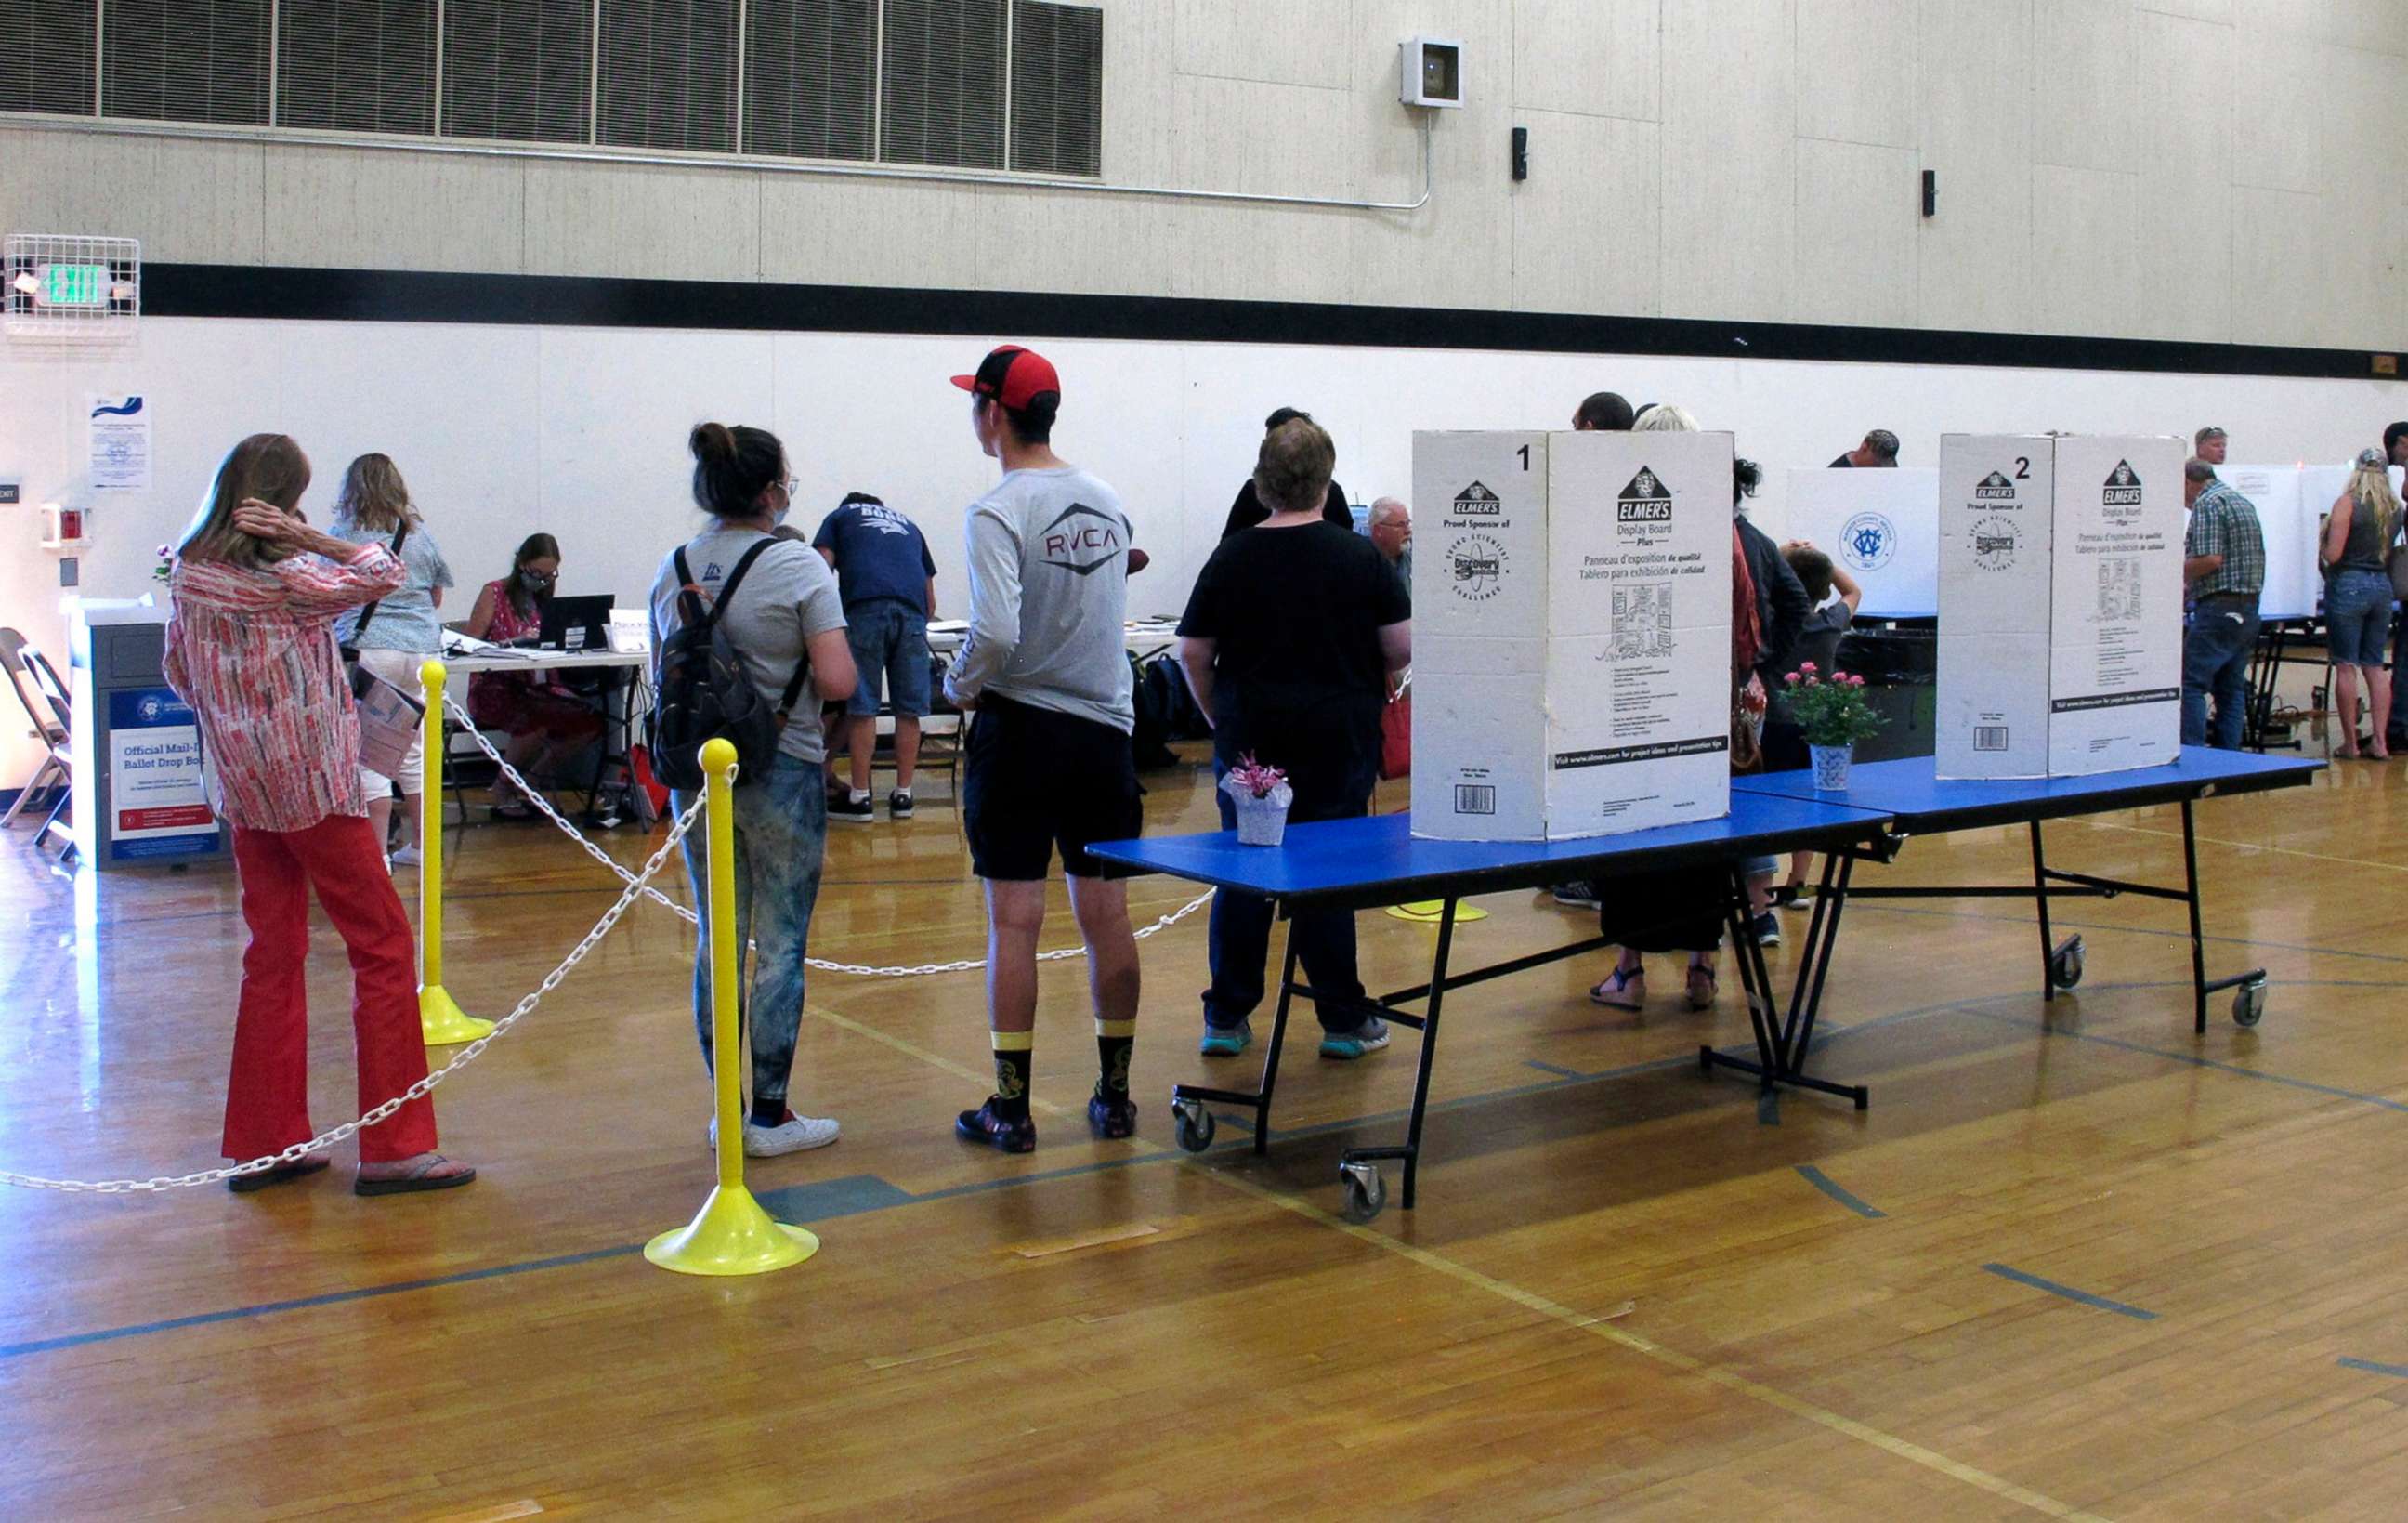 PHOTO: Washoe County voters line up to cast their primary election ballots inside a gymnasium at Reed High School in Sparks, Nevada, June 14, 2022. 